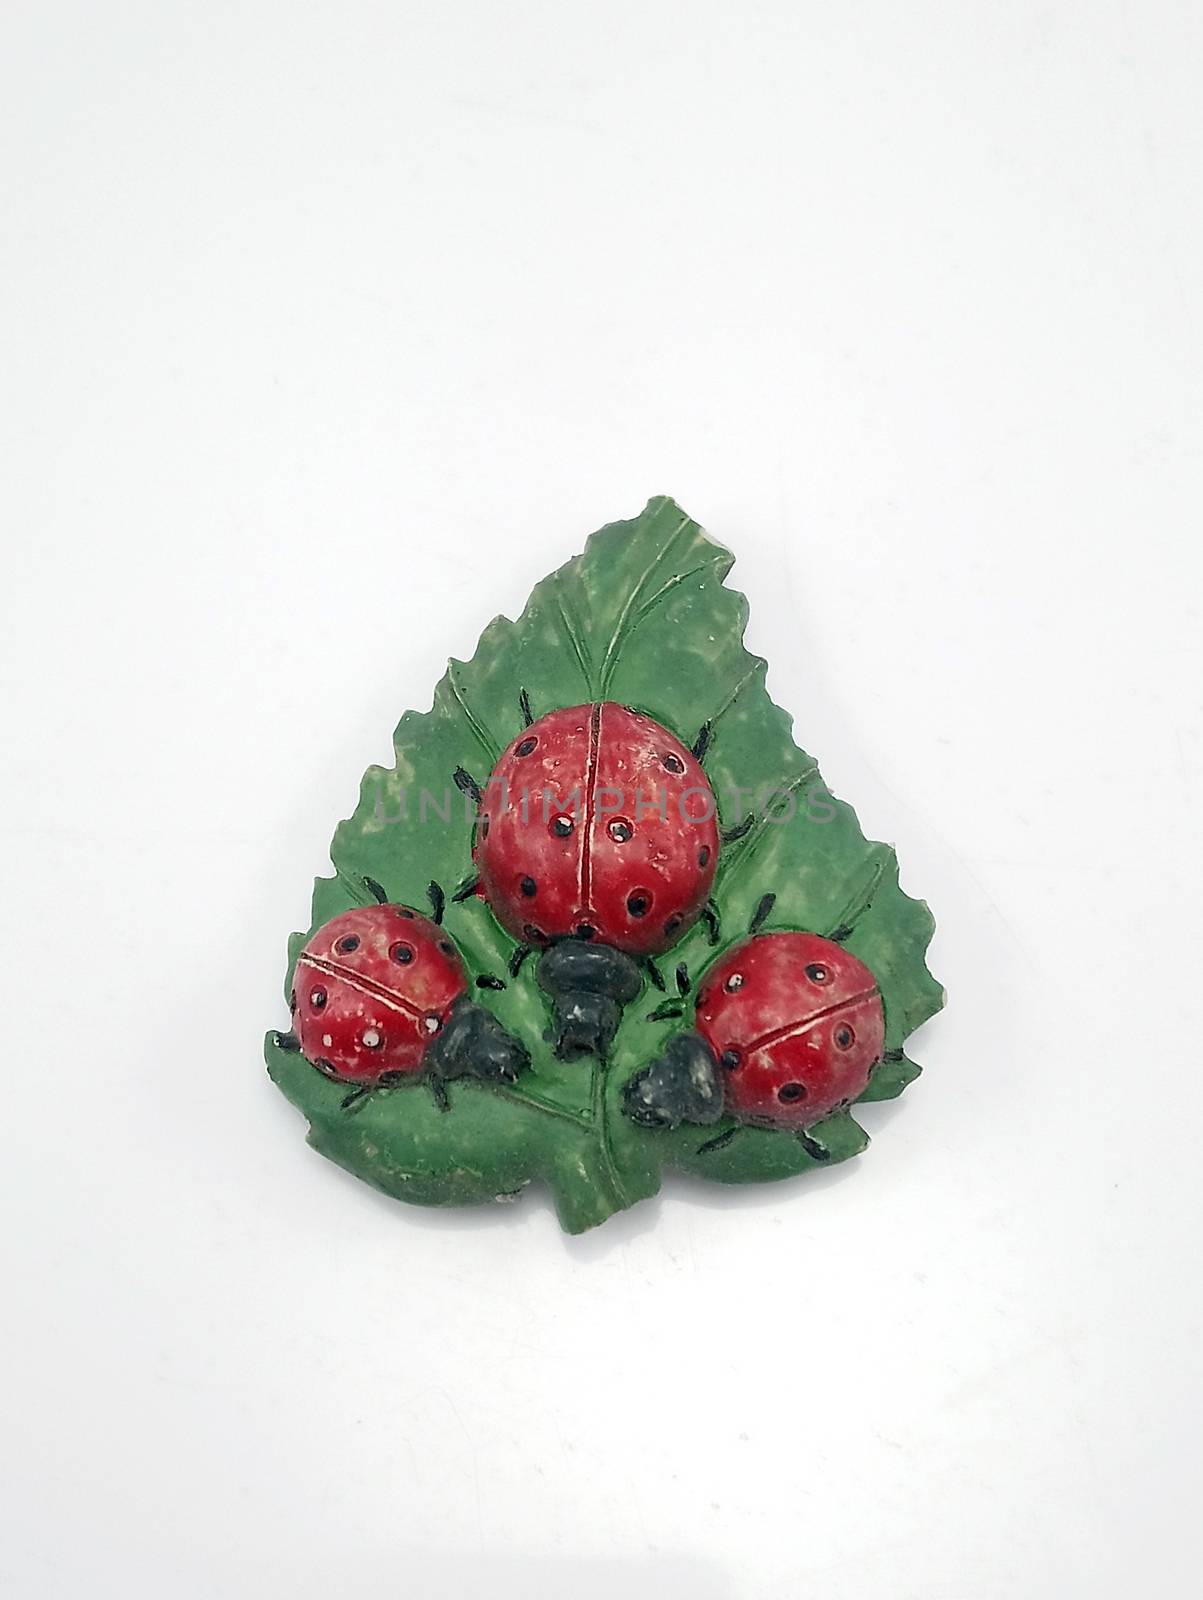 Lady bugs with leaf refrigerator magnet use to stick on metal refrigerator